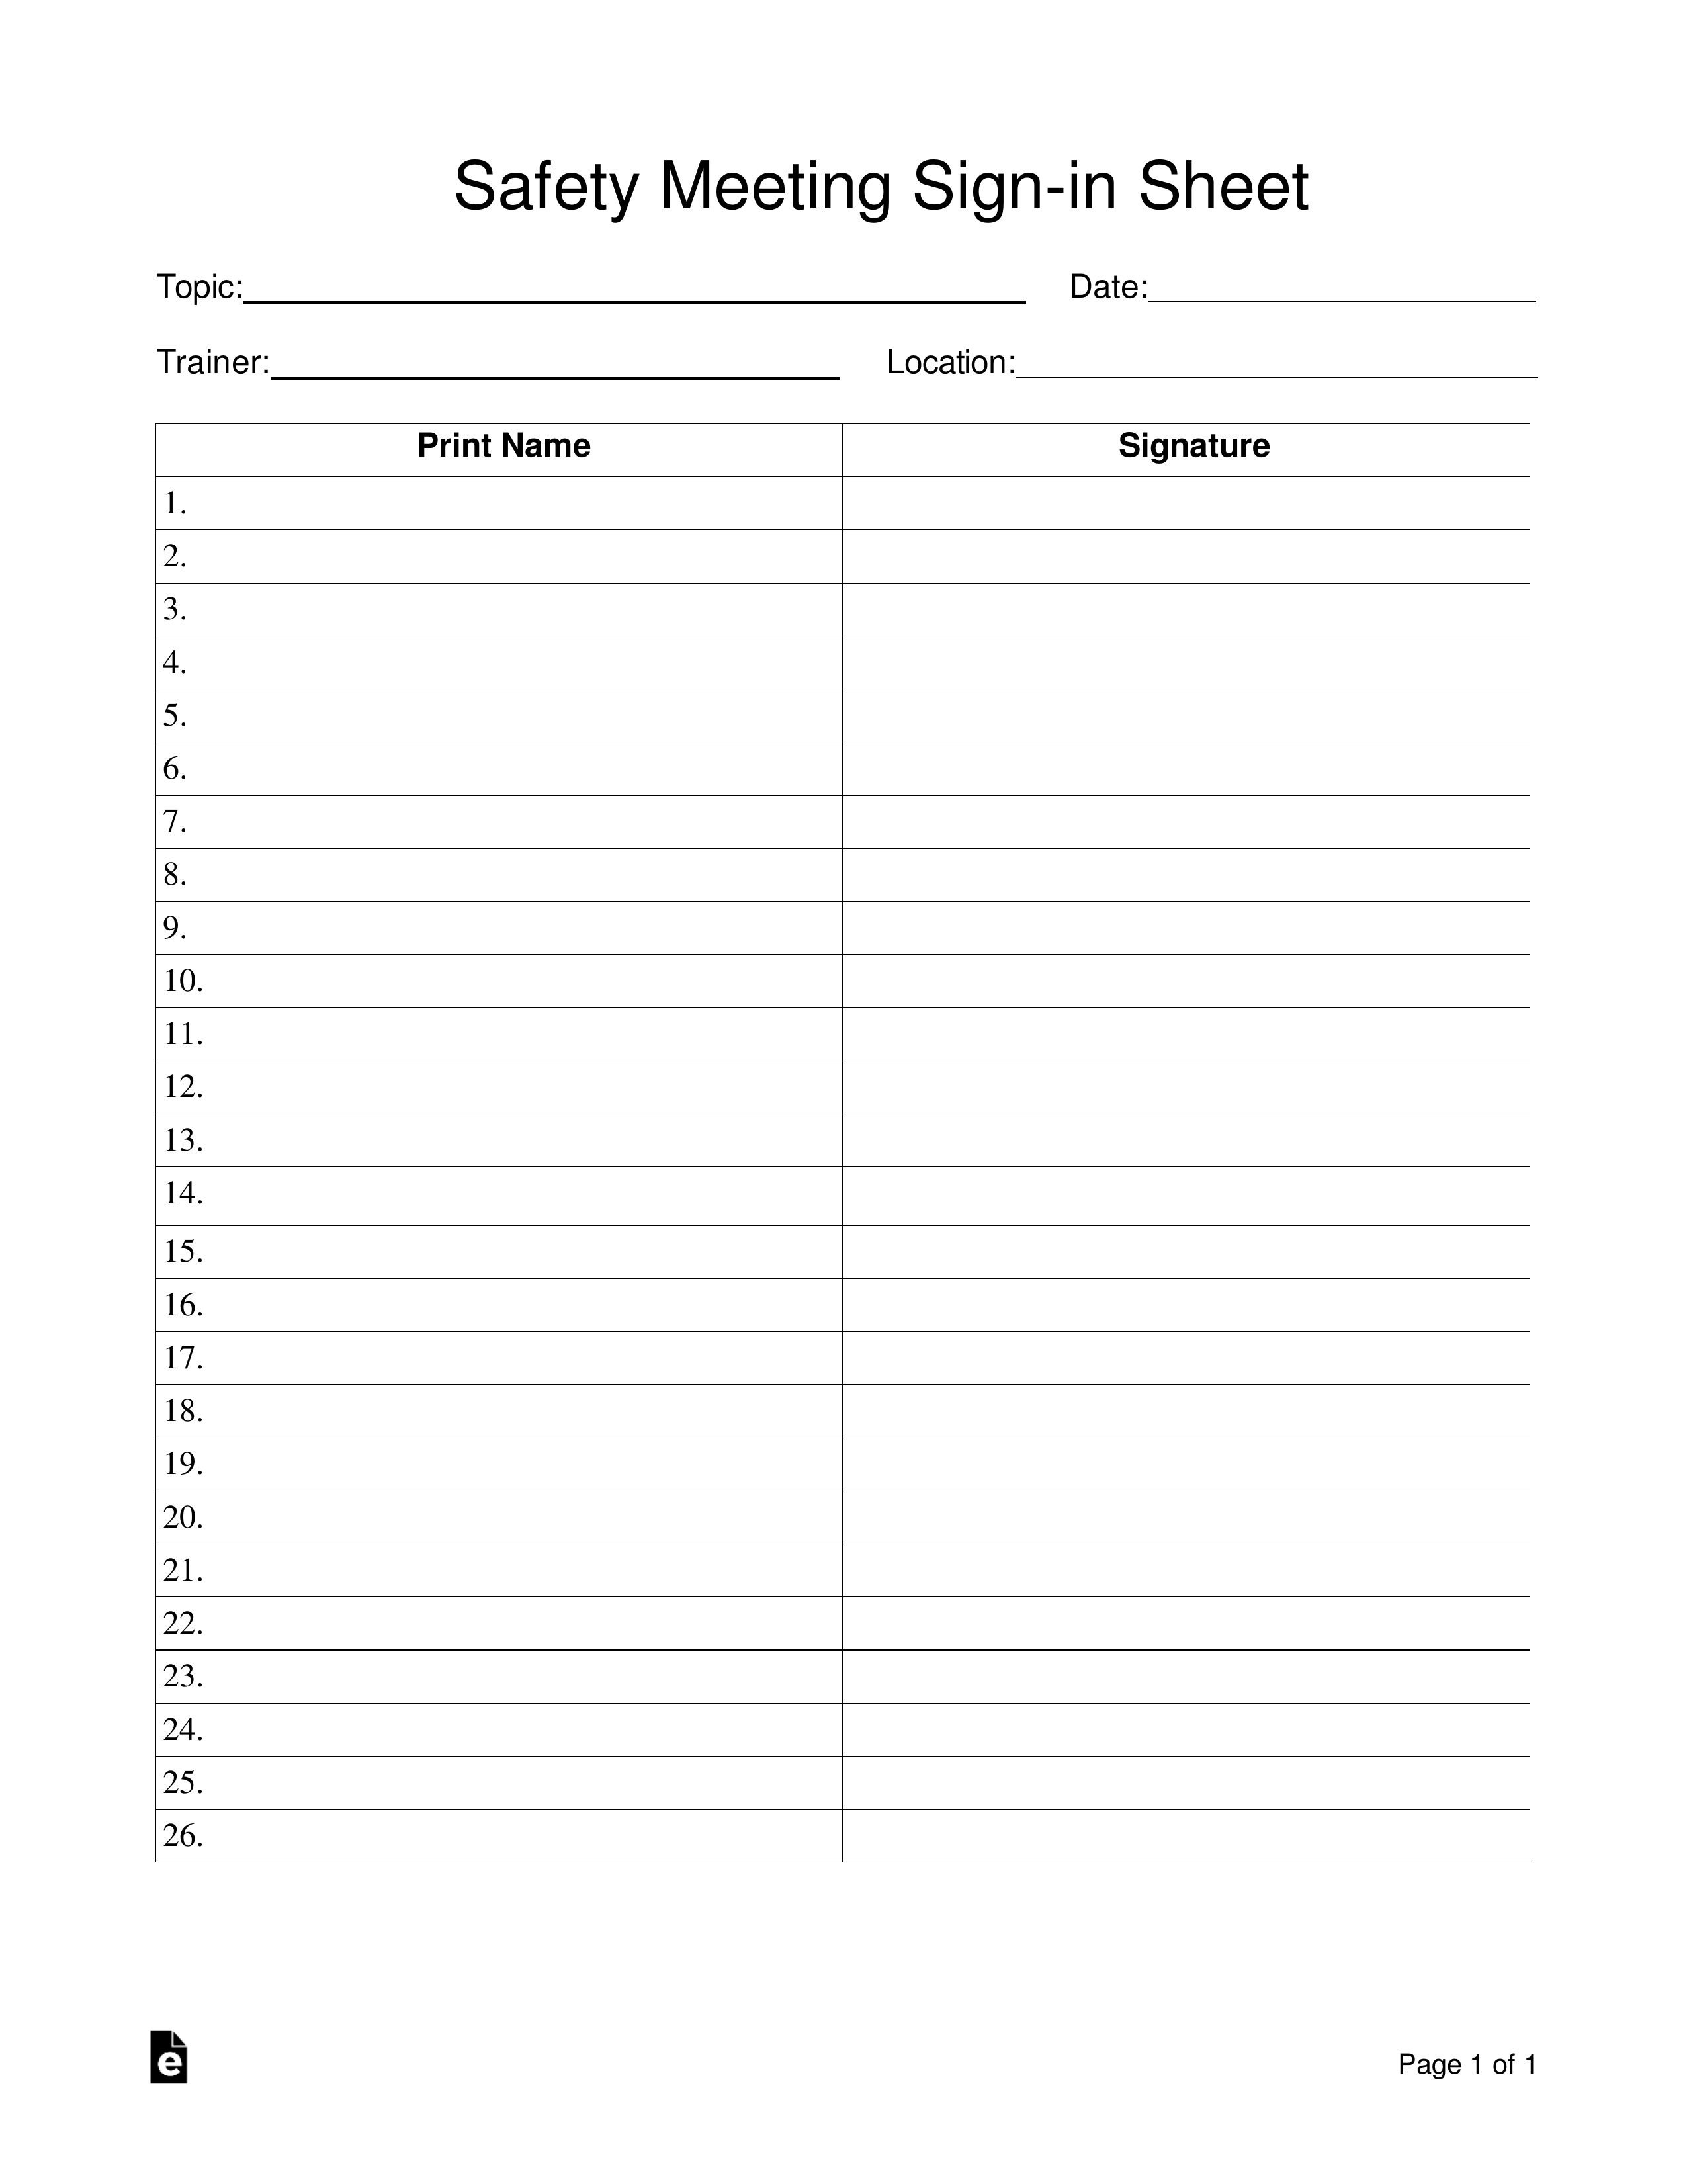 free-safety-meeting-sign-in-sheet-template-pdf-word-eforms